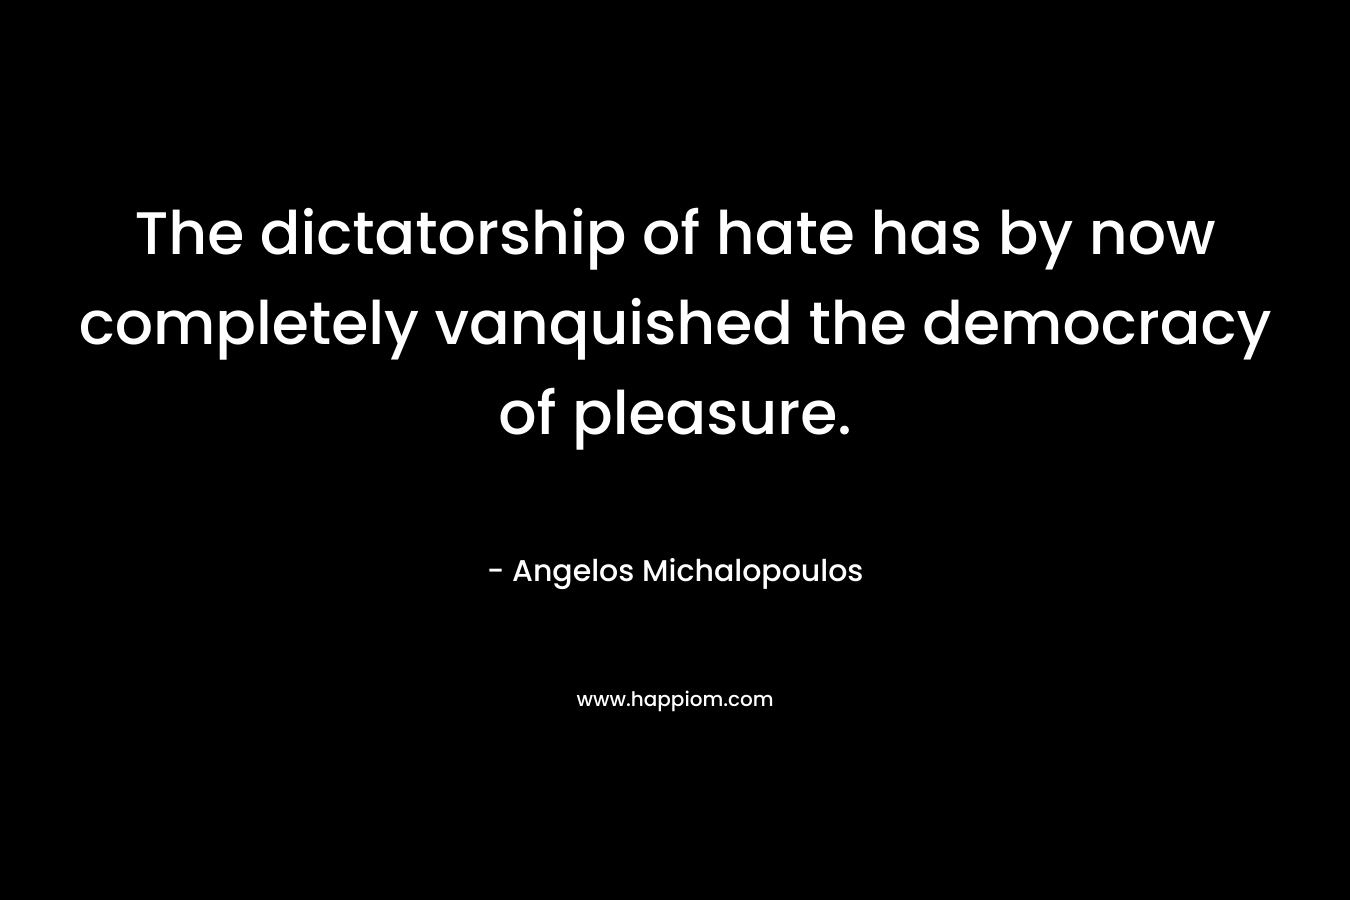 The dictatorship of hate has by now completely vanquished the democracy of pleasure. – Angelos Michalopoulos